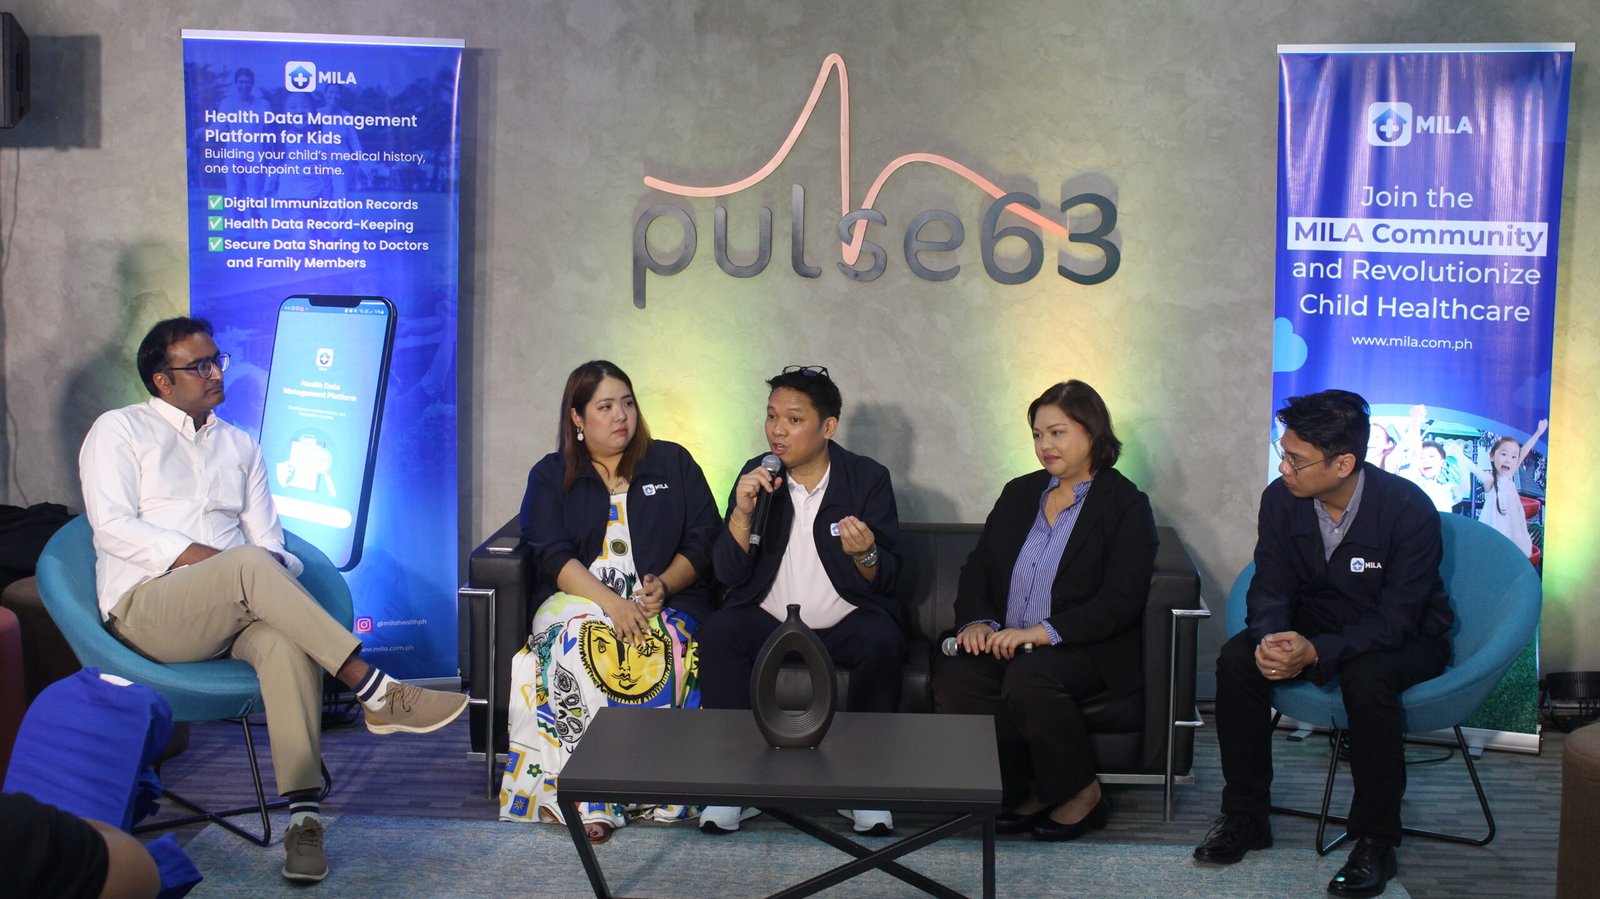 MILA App to help Filipino mothers with children’s medical records